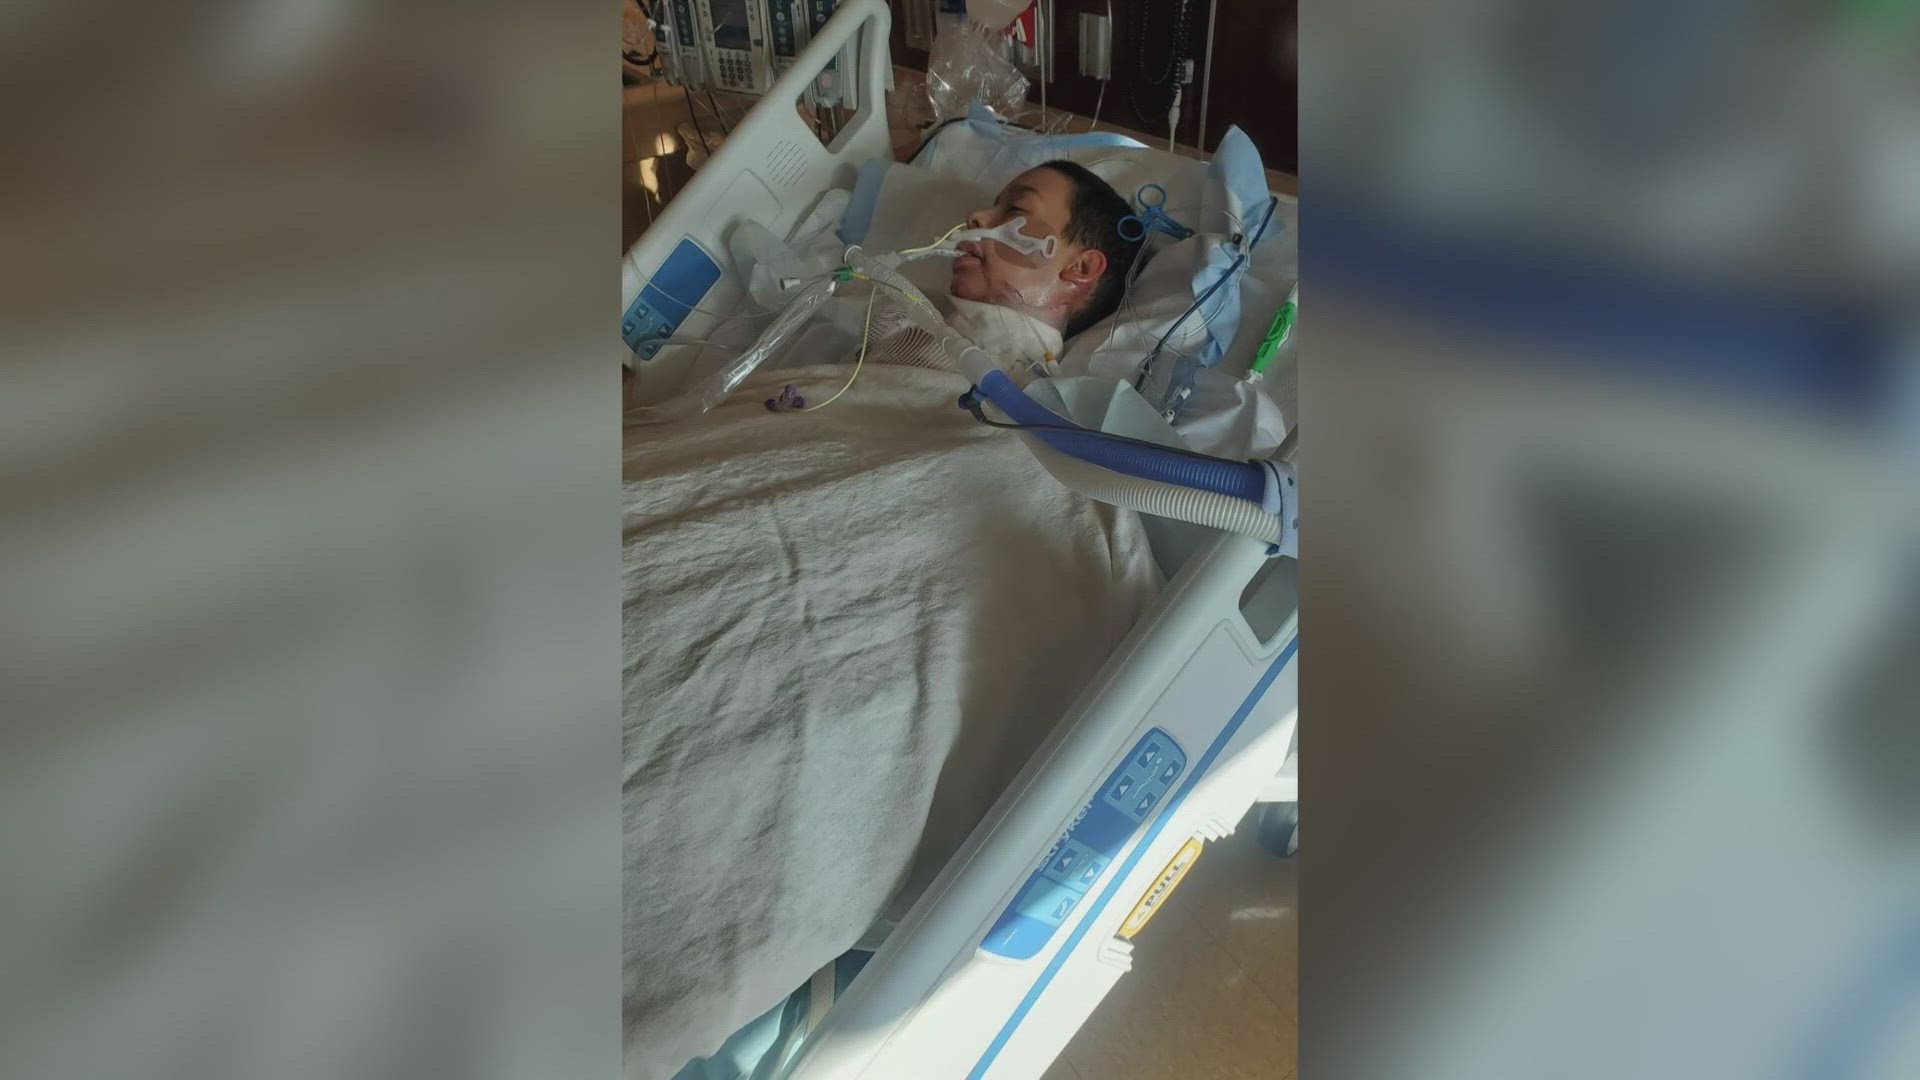 Tucson boy suffers severe burns after trying TikTok challenge